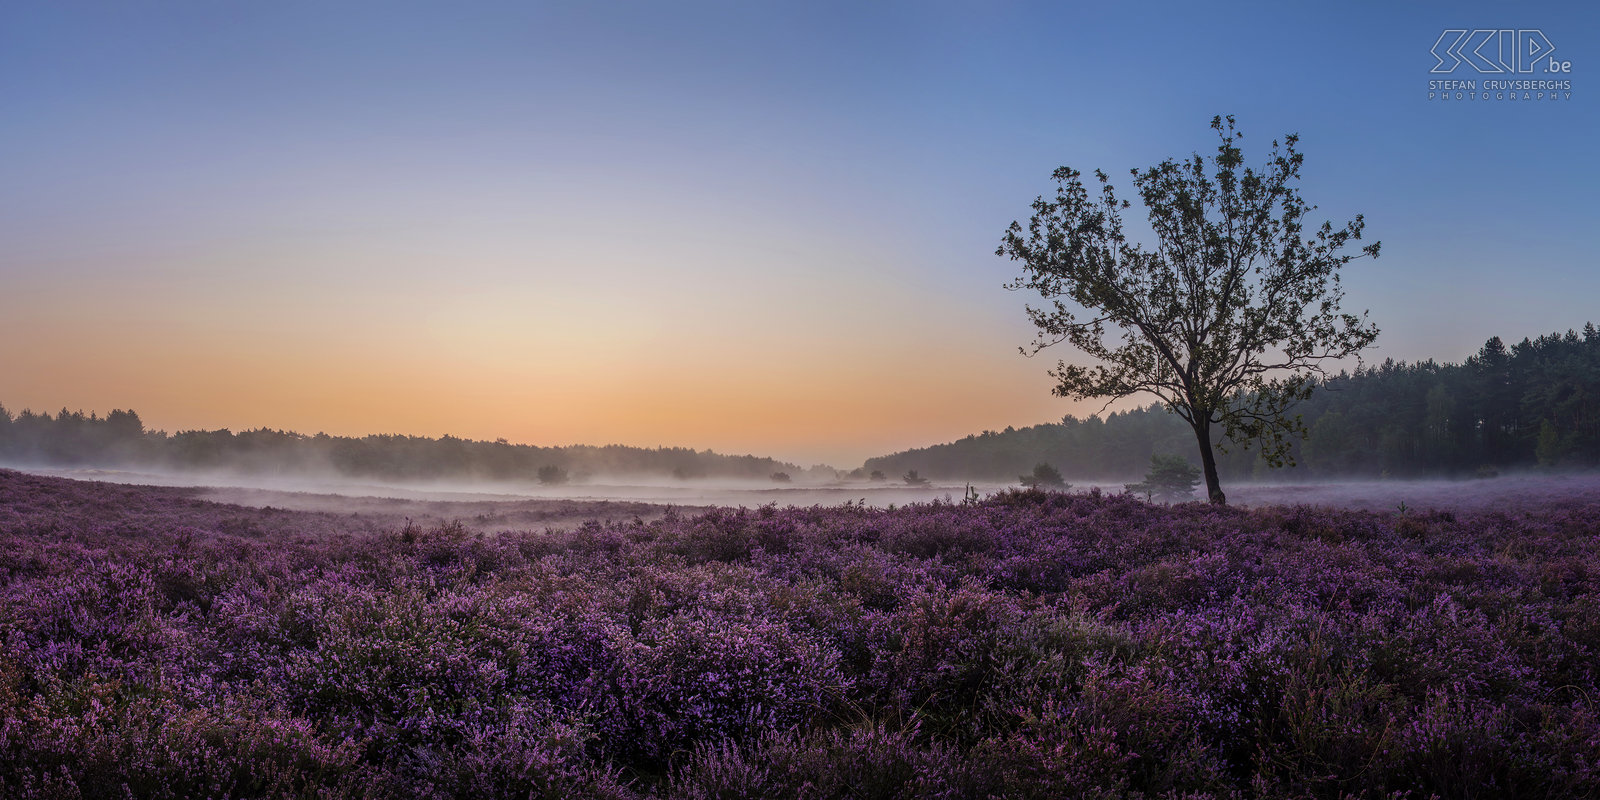 Blooming heathland - Blekerheide The most interesting time for landscape photographers in my home region the Kempen is definitely the blooming period of the heather in late August. This year it was a two weeks earlier than other years. I woke up early multiple times to photograph the sunrise at the heathlands of the Blekerheide and the Heuvelse heide in my hometown Lommel.<br />
 Stefan Cruysberghs